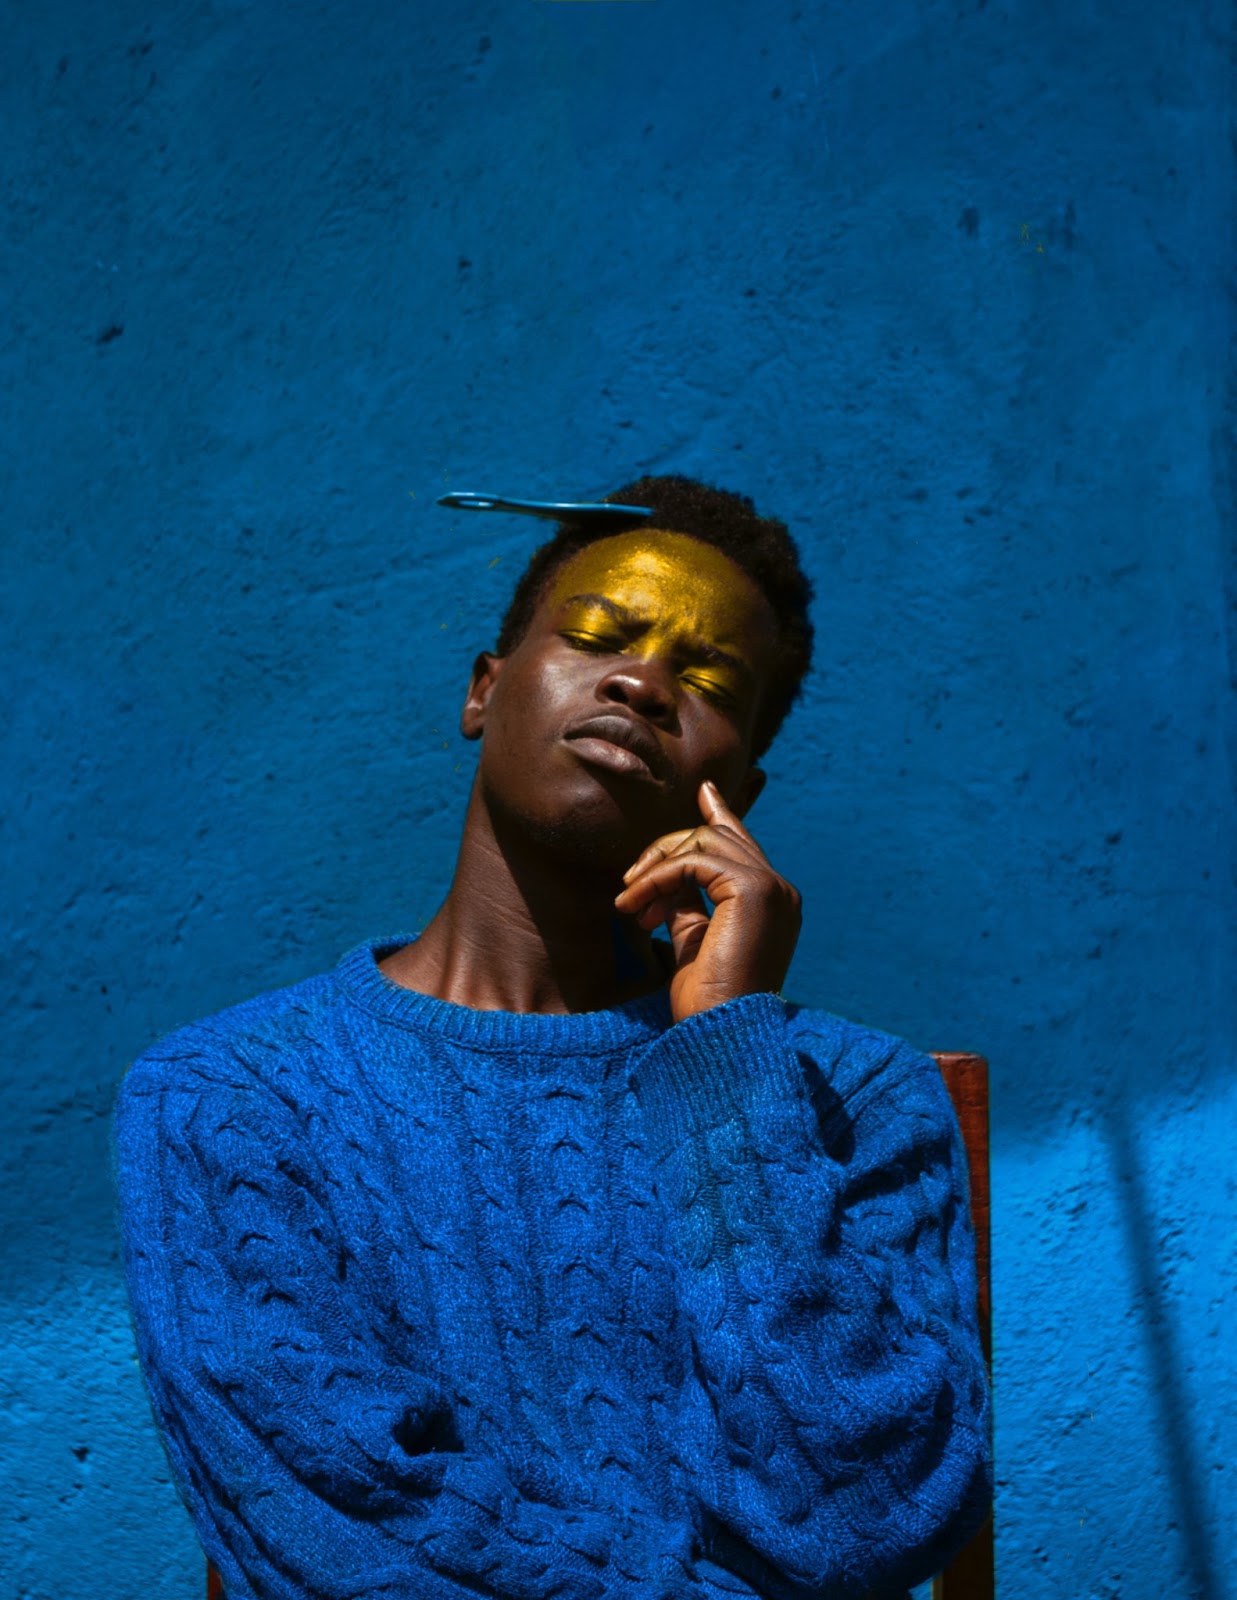 man posing in a blue sweater with gold highlight on forehead